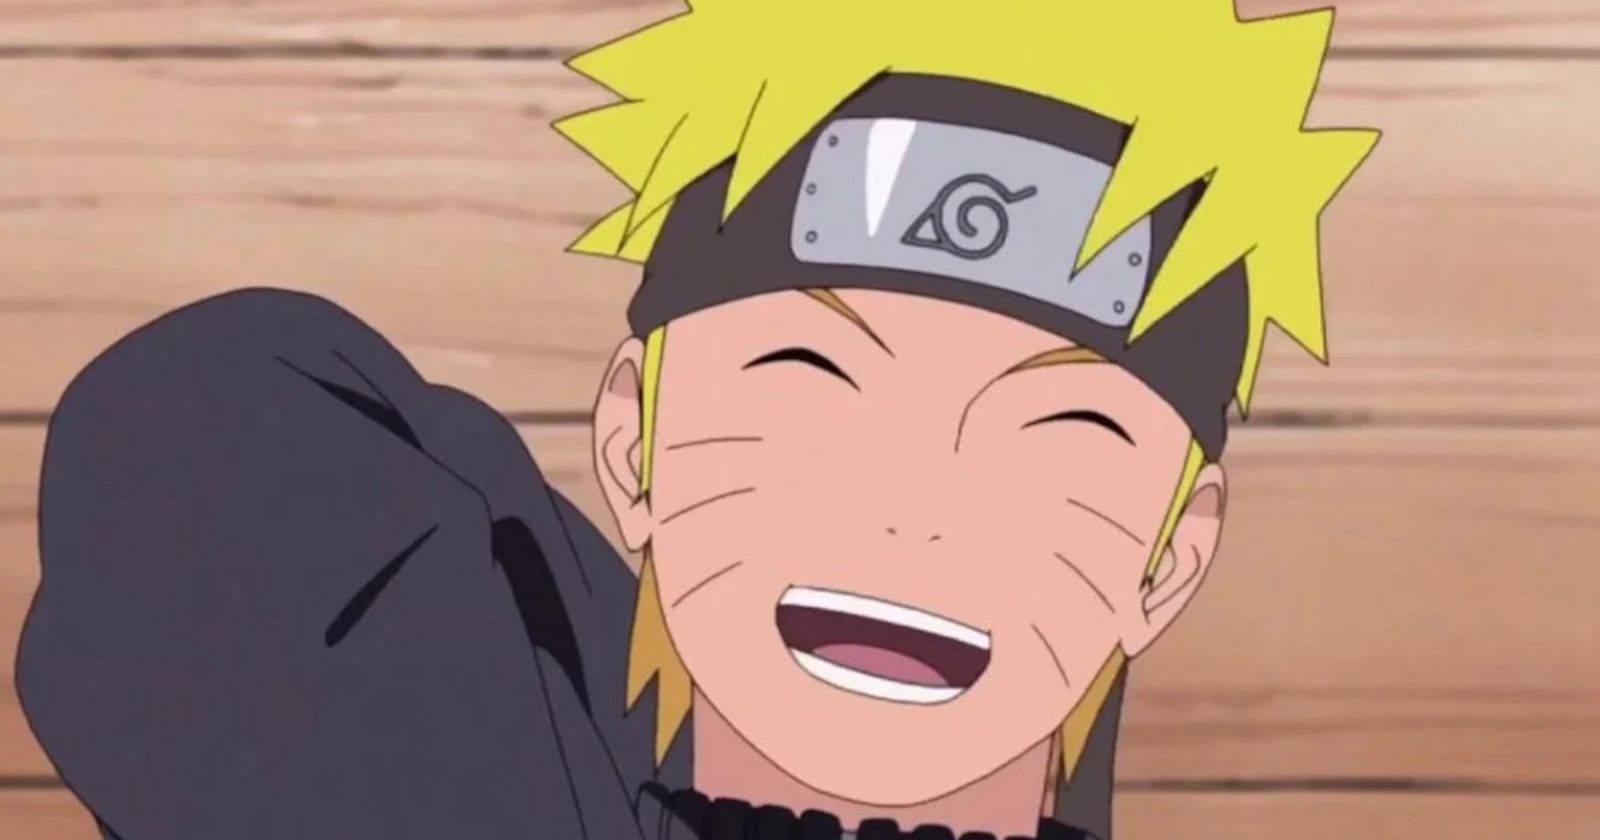 5 Naruto Characters Shisui Uchicha can beat effortlessly (& 5 he never will)